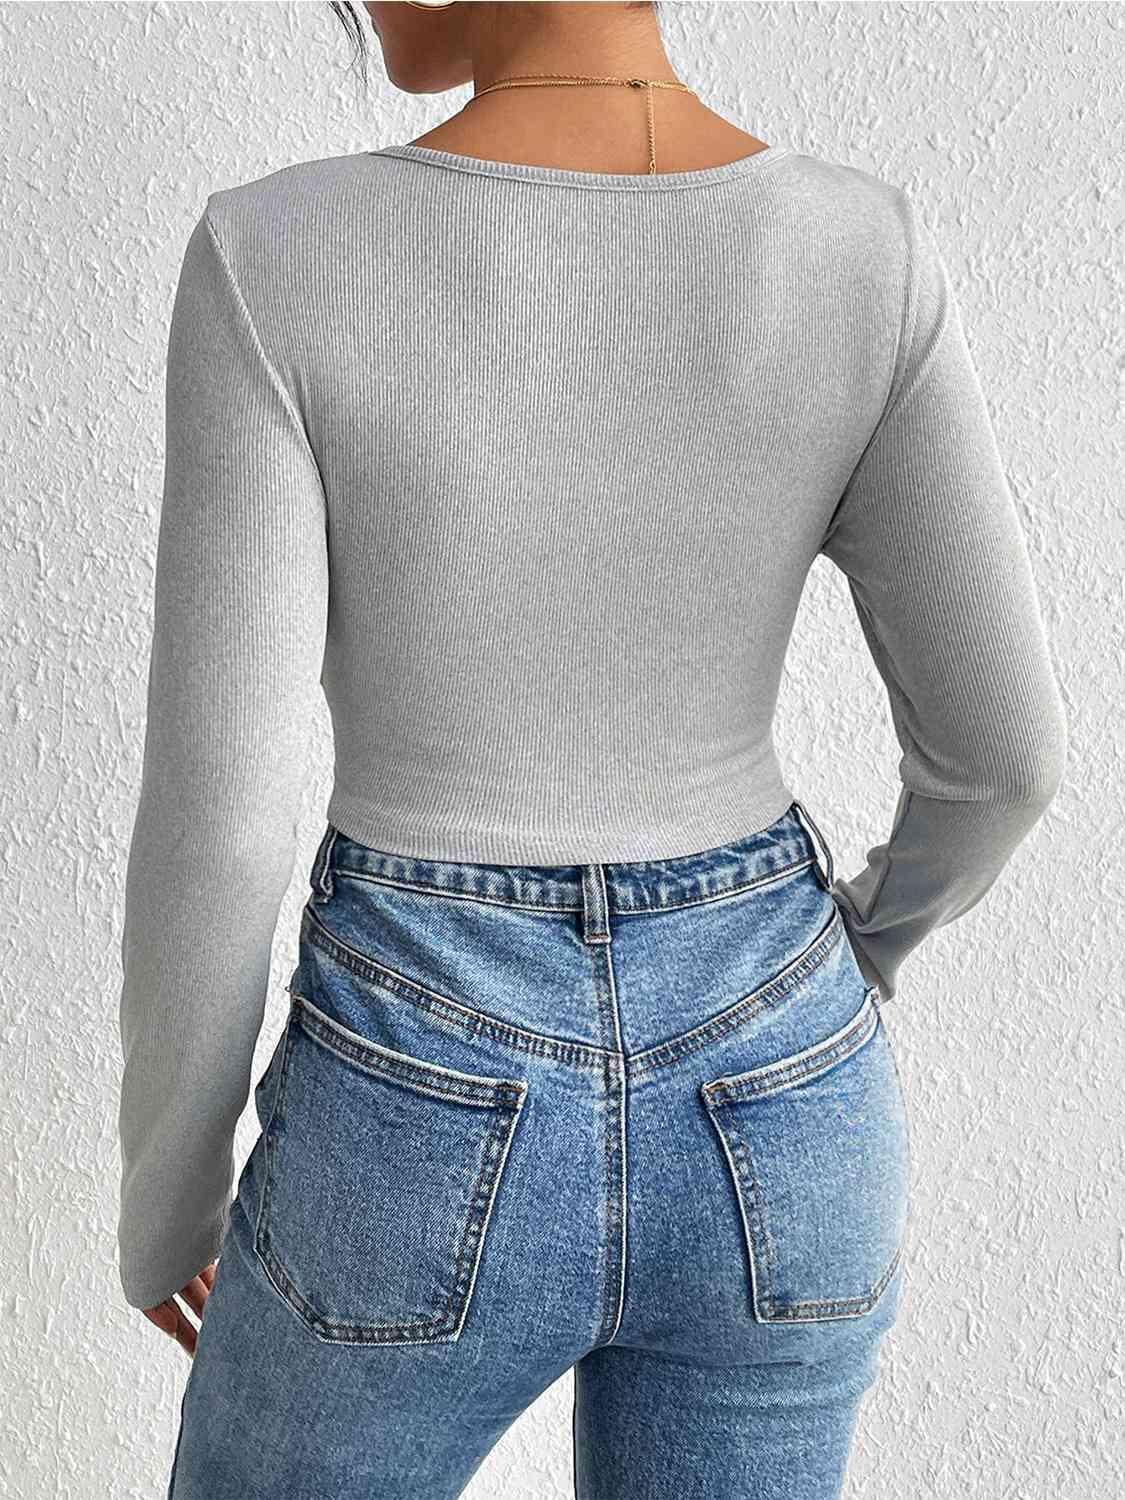 the back of a woman's body wearing jeans